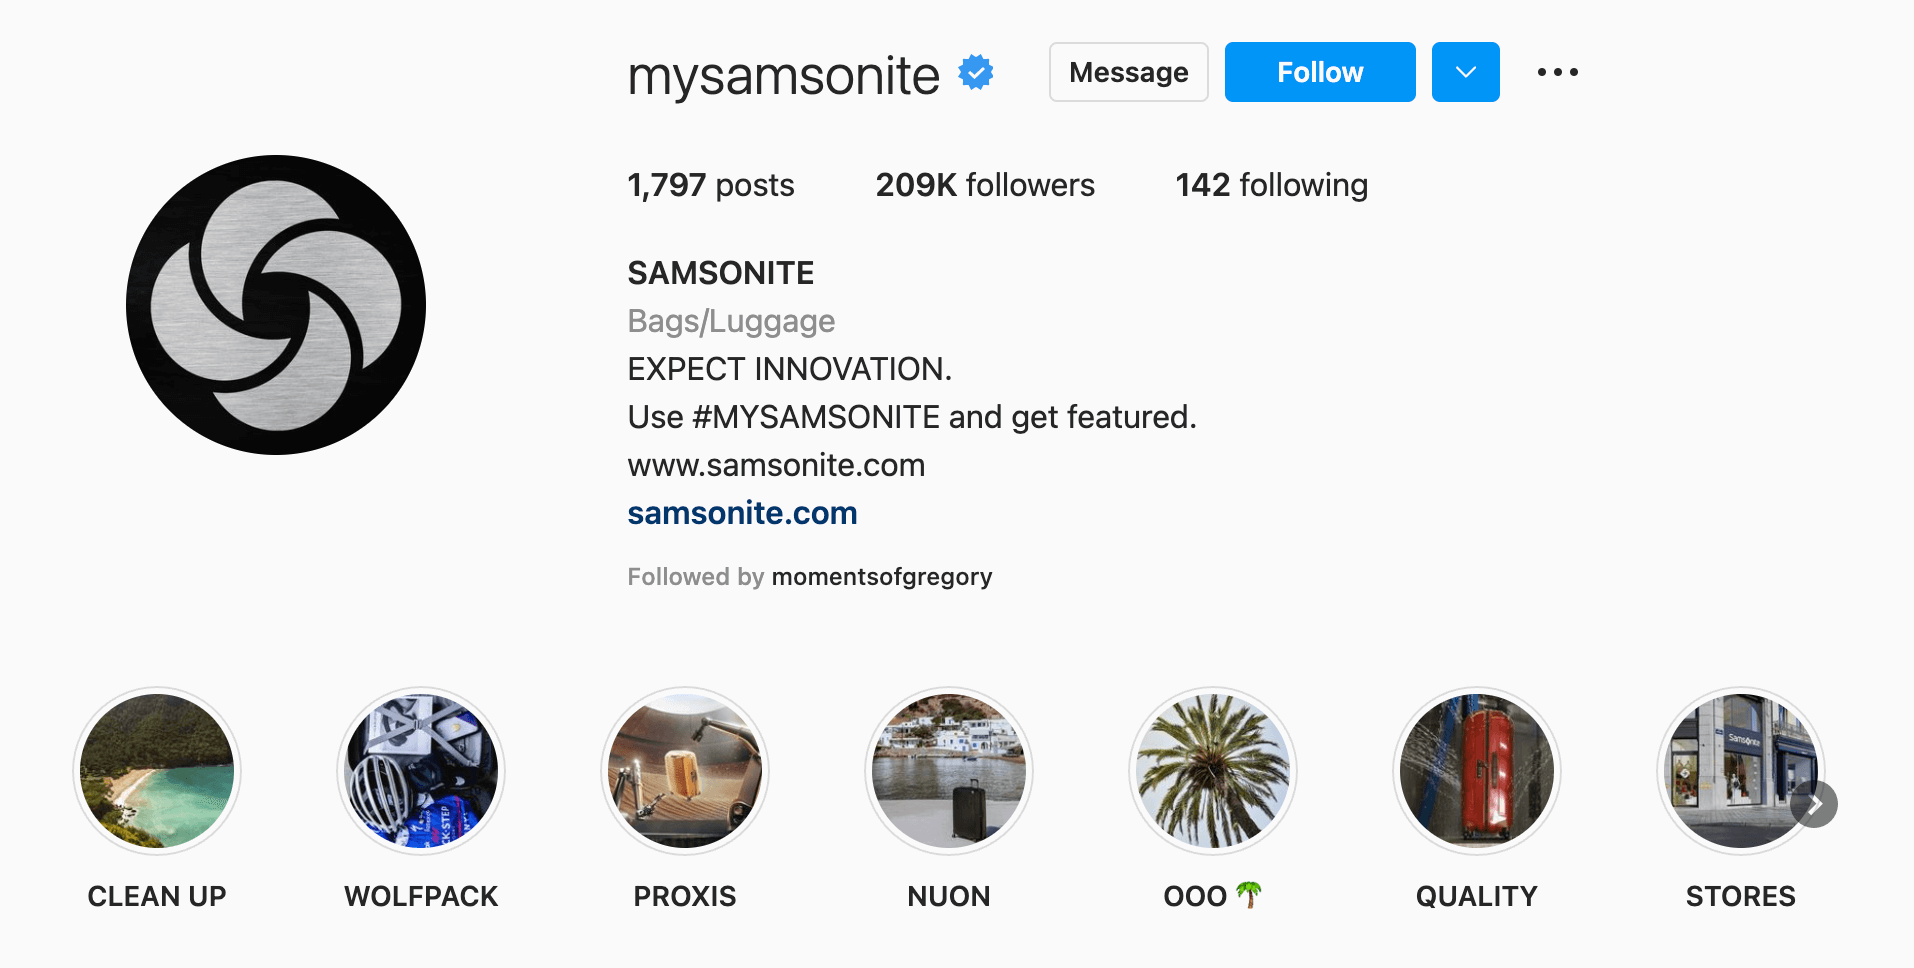 mysamsonite instagram page showing #mysamsonite hashtag black samsonite logo several highlights of stories with luggage styles and sustainability initiative work